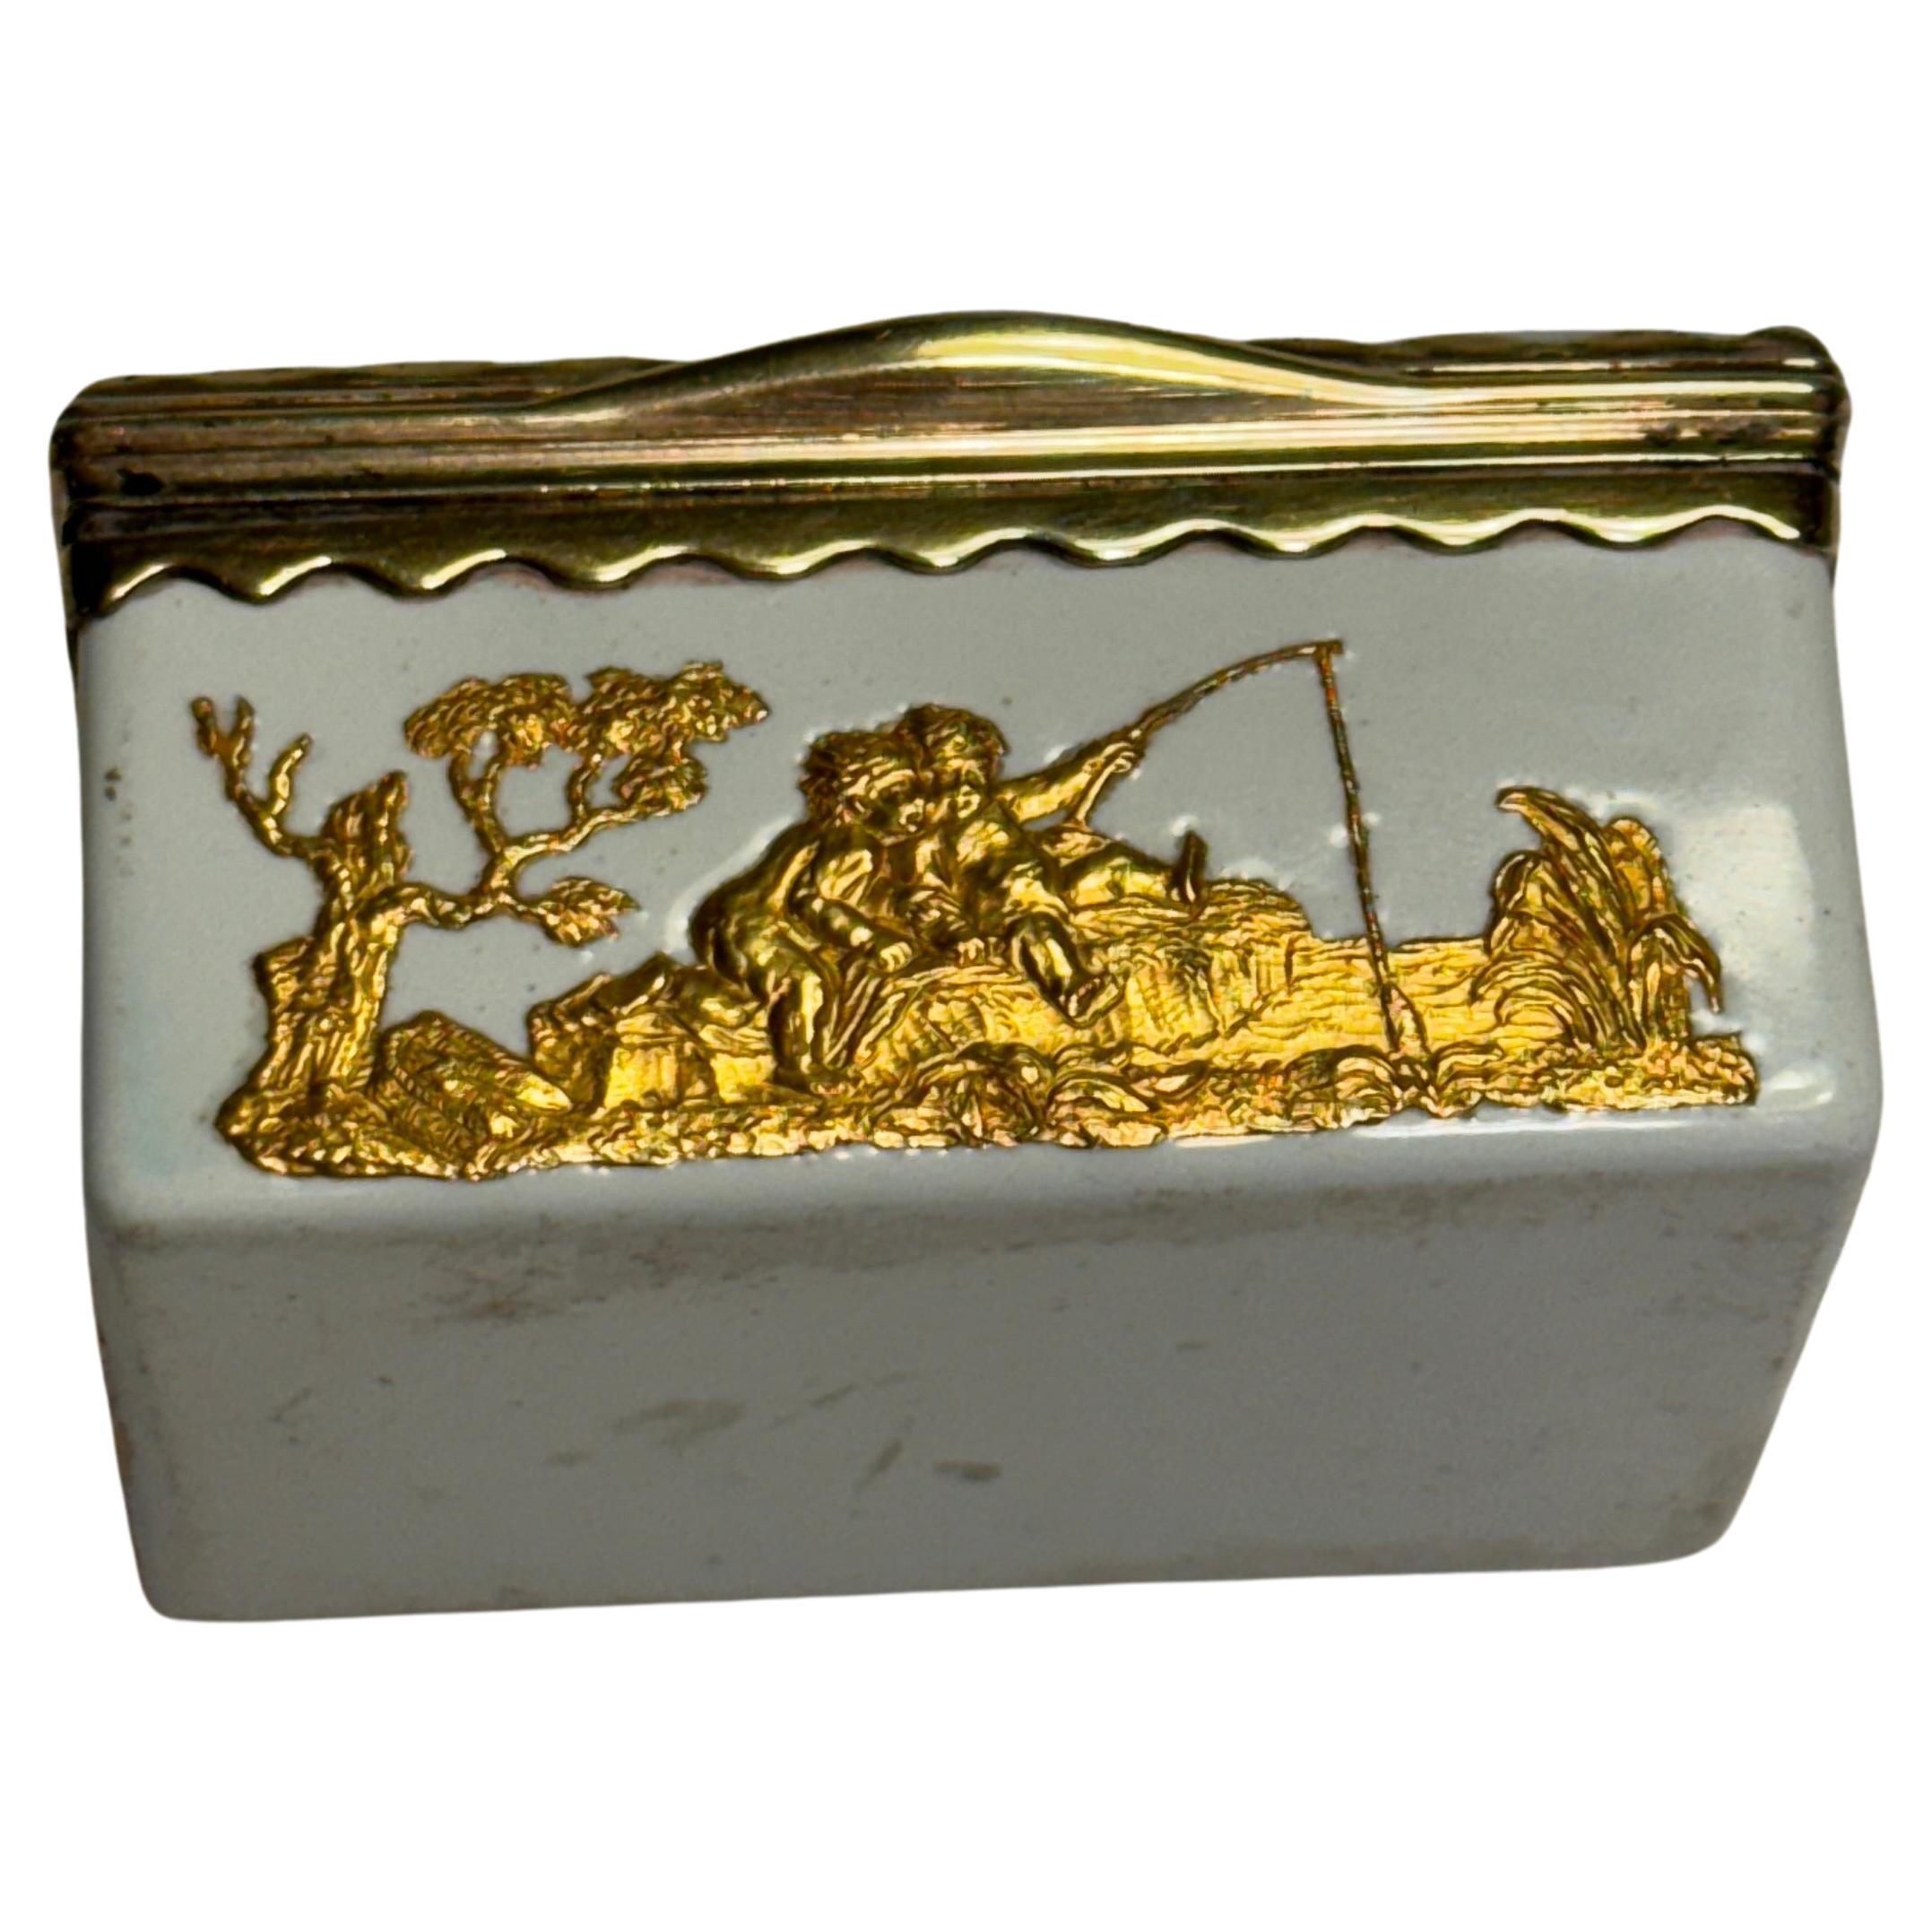 European 18th Century Porcelain Snuff Tobacco Box with Ormulu Gilt Decorations For Sale